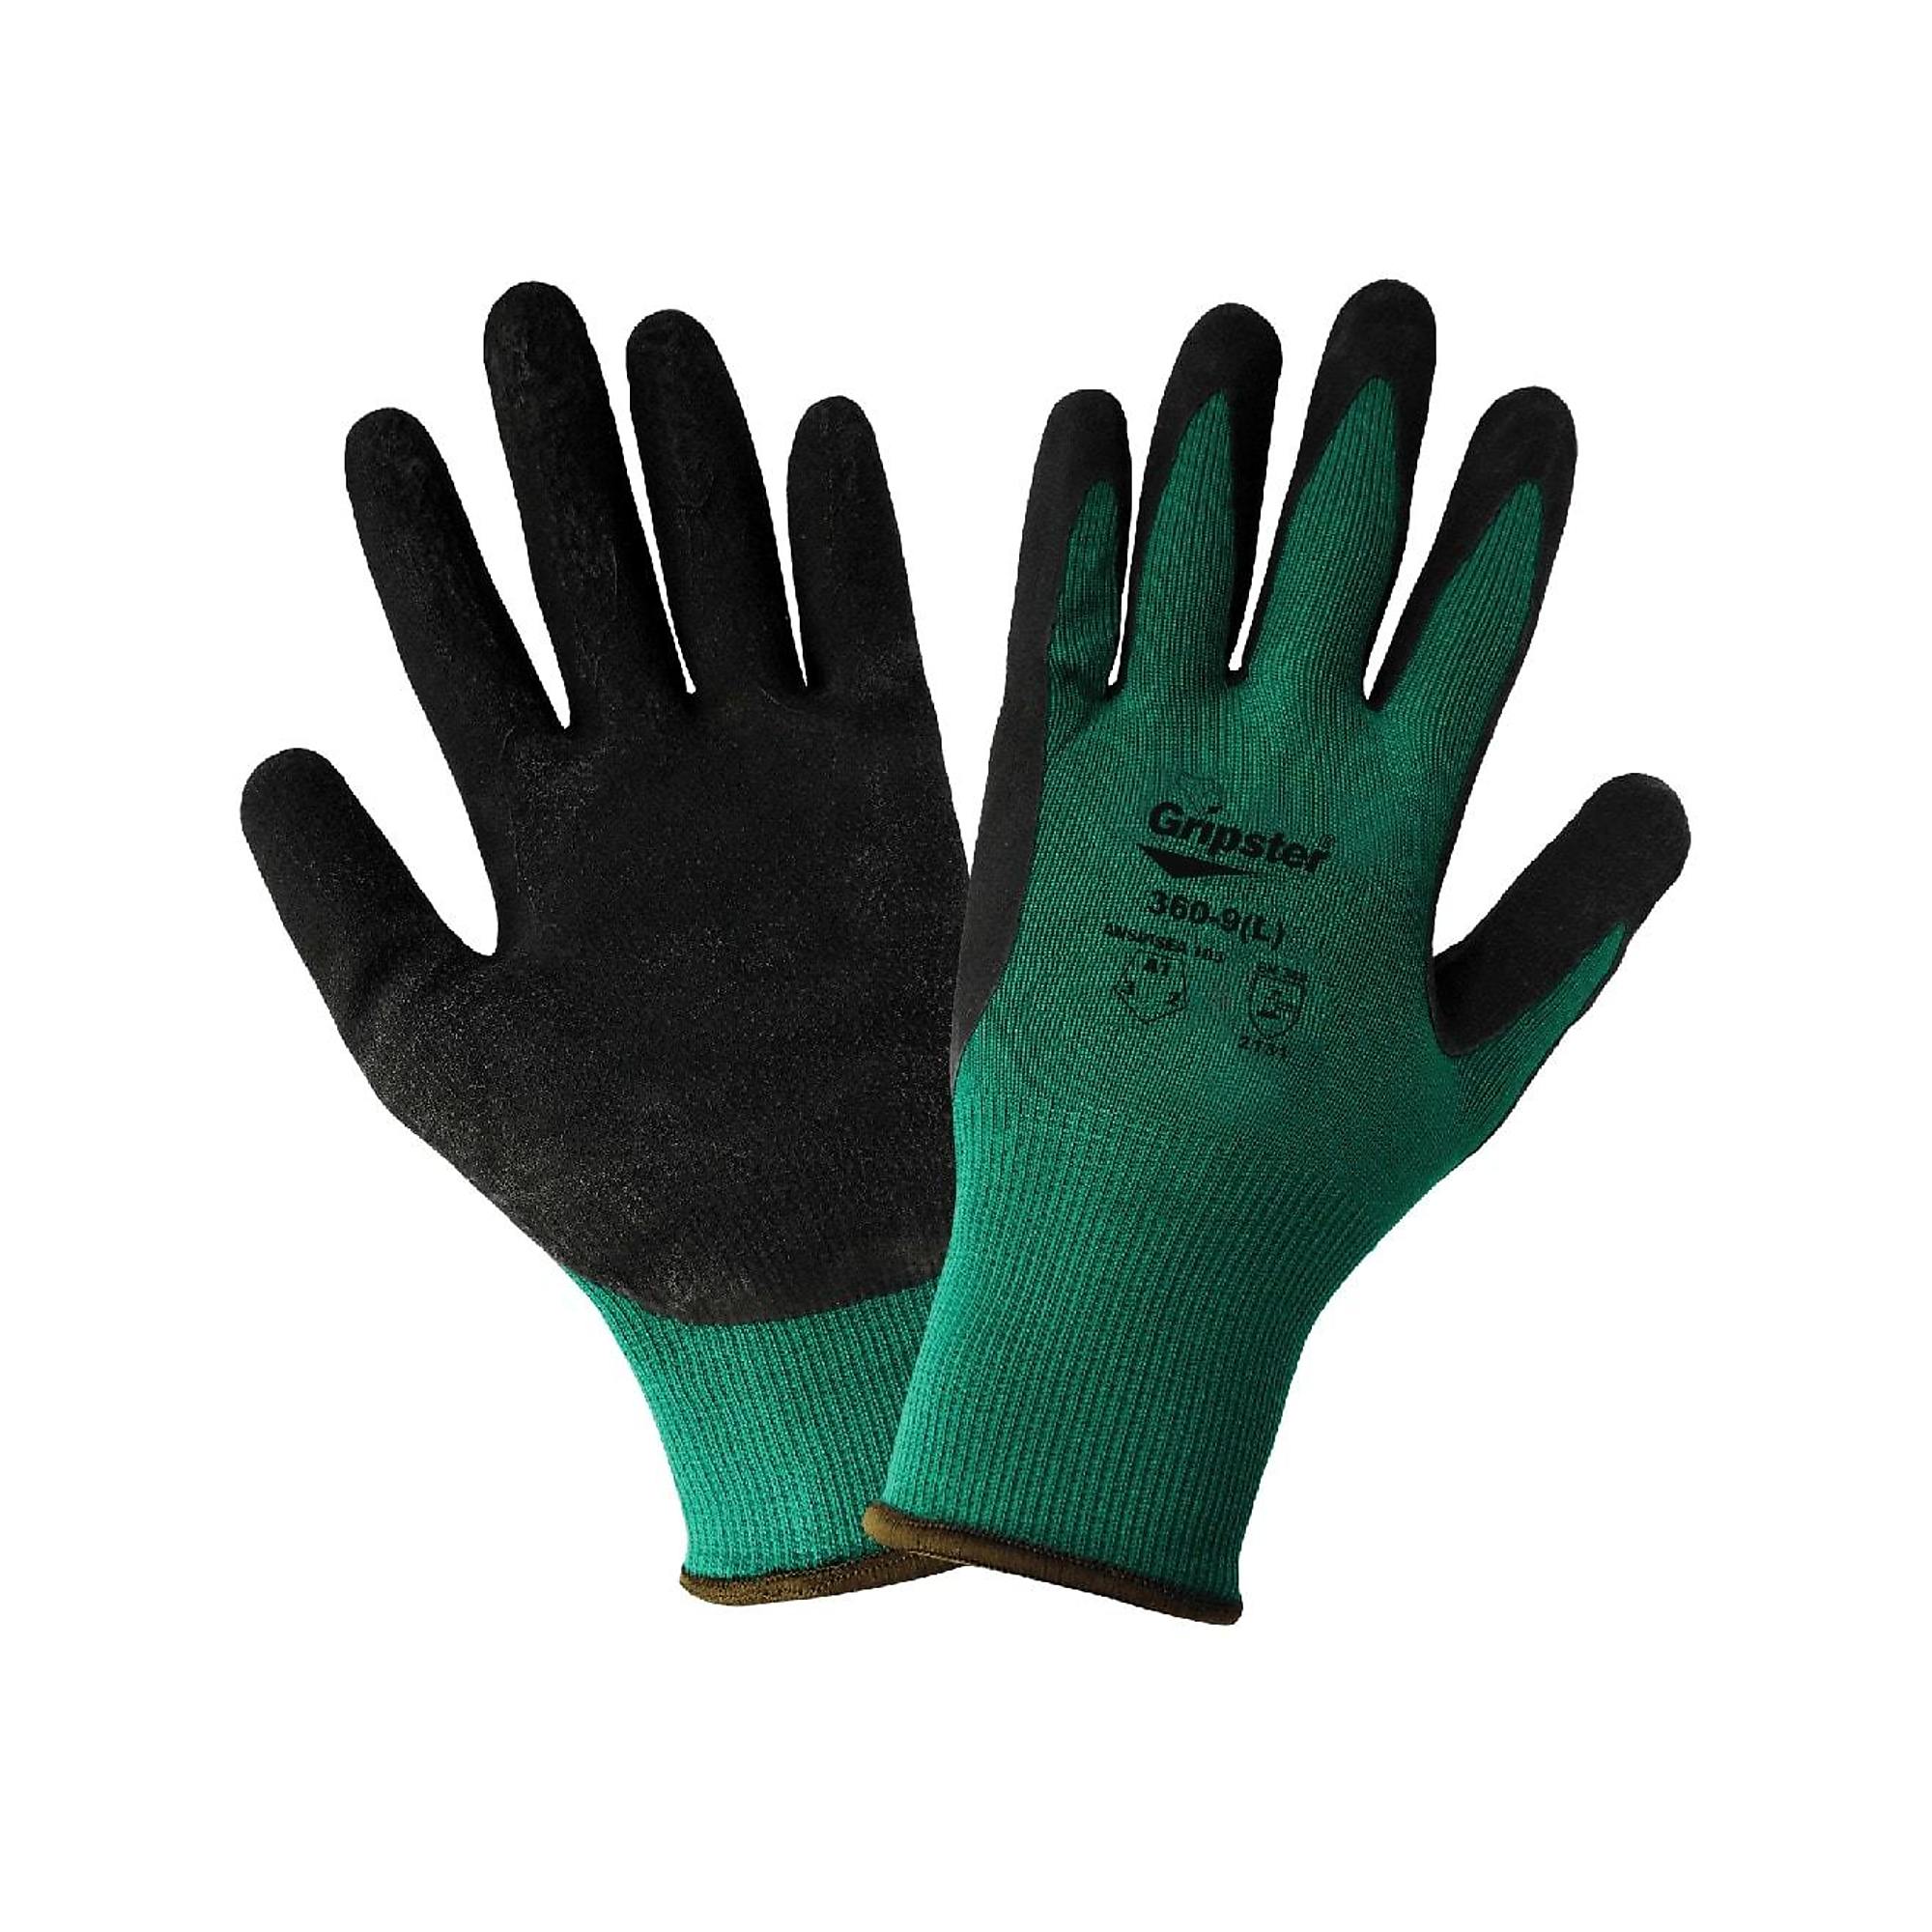 Global Glove Gripster , Green, Black Rub Coated, Cut Resistant A1 Gloves - 12 Pairs, Size L, Color Green/Black, Included (qty.) 12 Model 360-9(L)